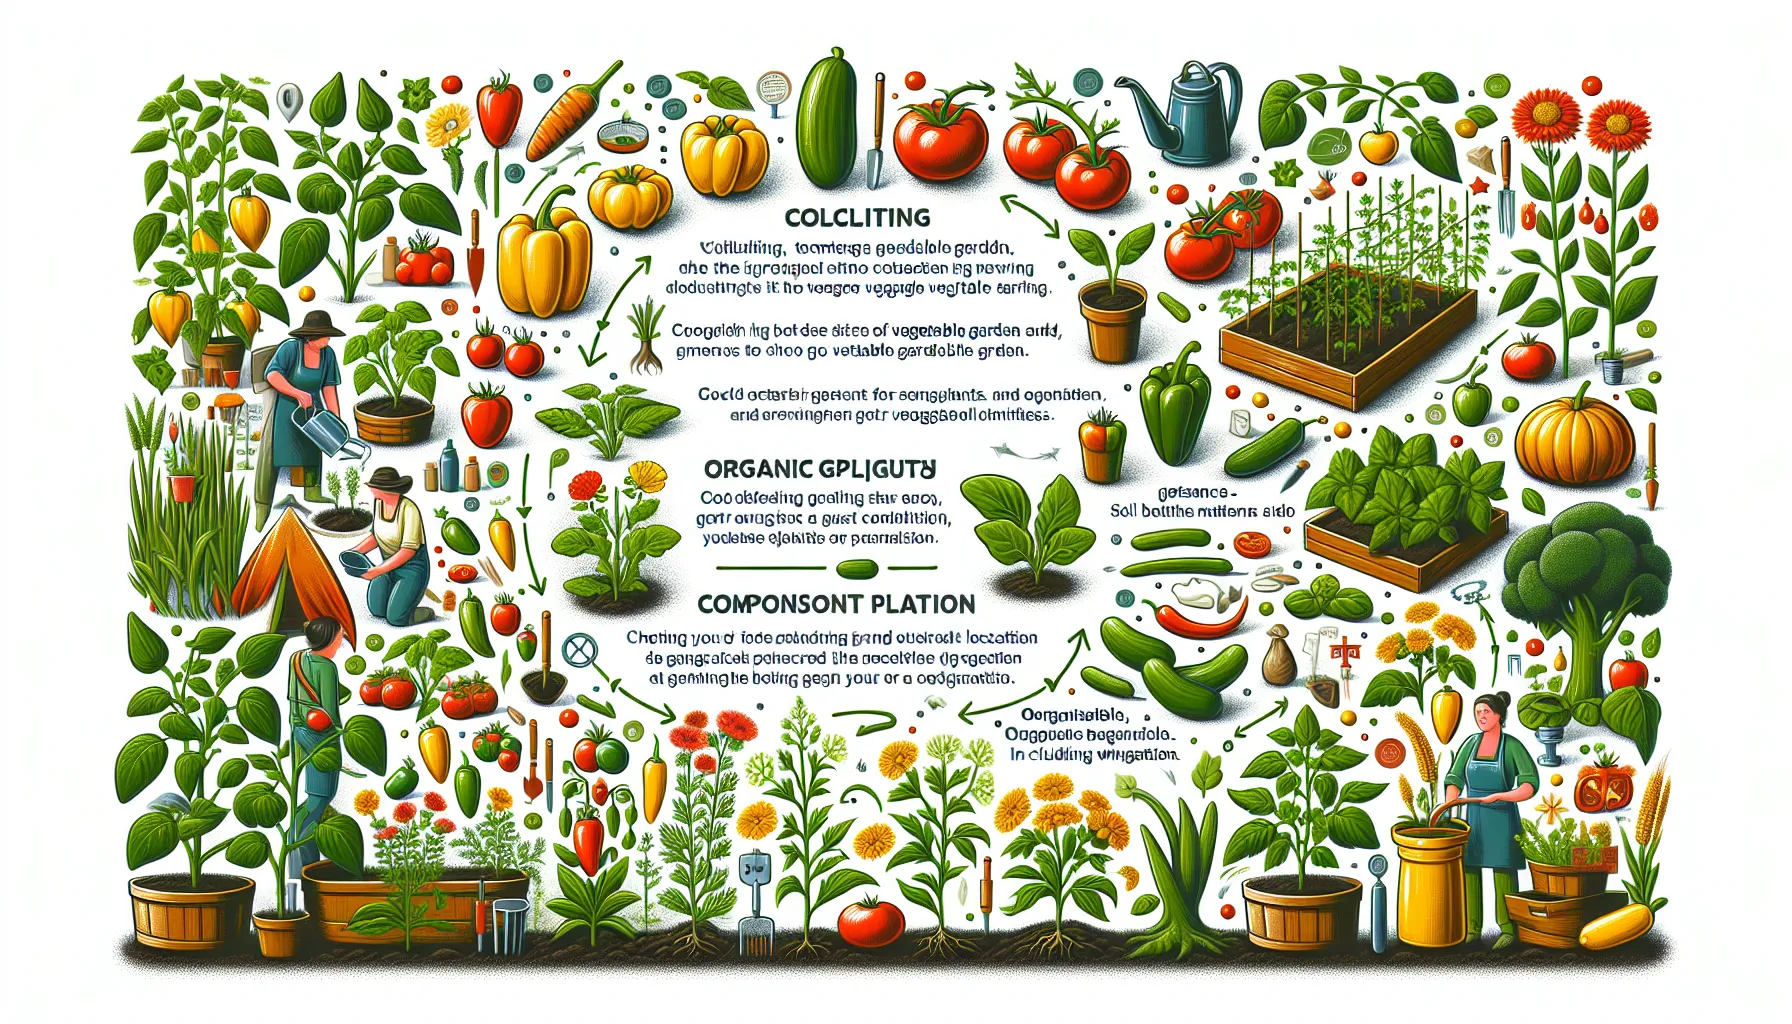 An illustrated overview of a vegetable garden with plants, gardening tools, and two people tending to various crops and seedlings.